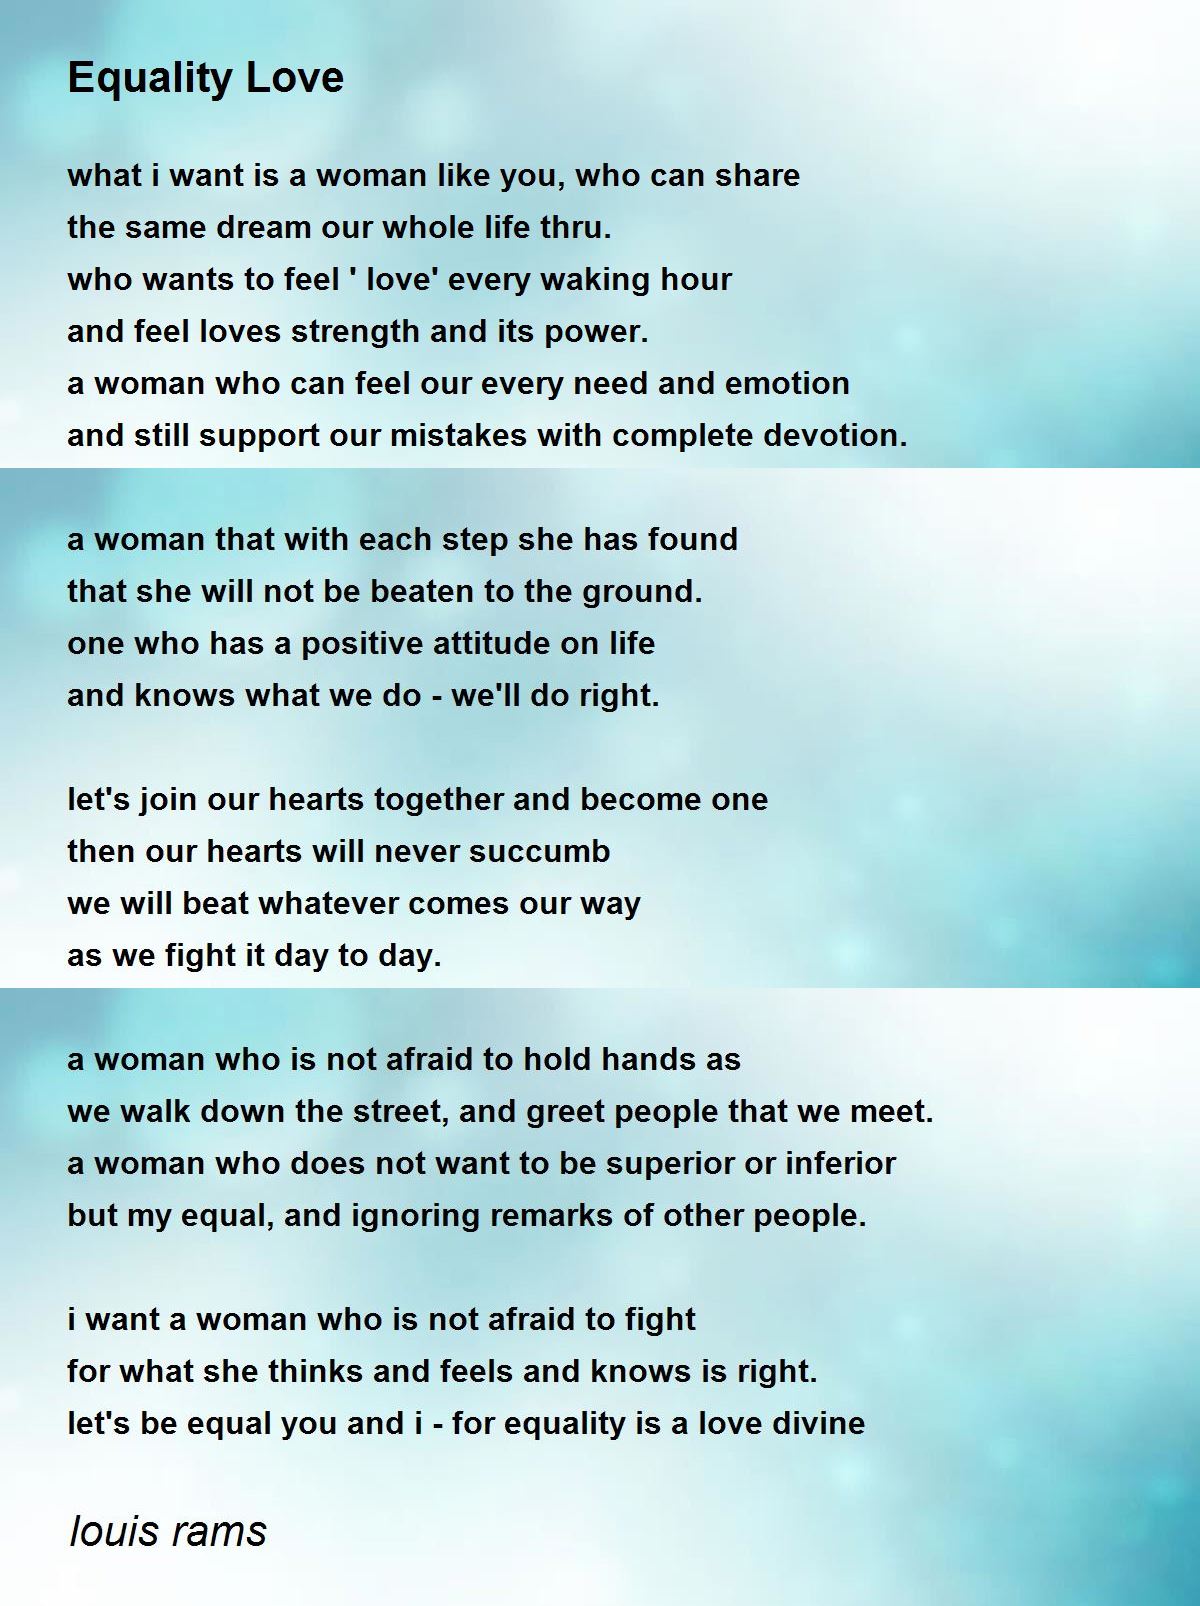 Equality - Equality Love Poem by louis